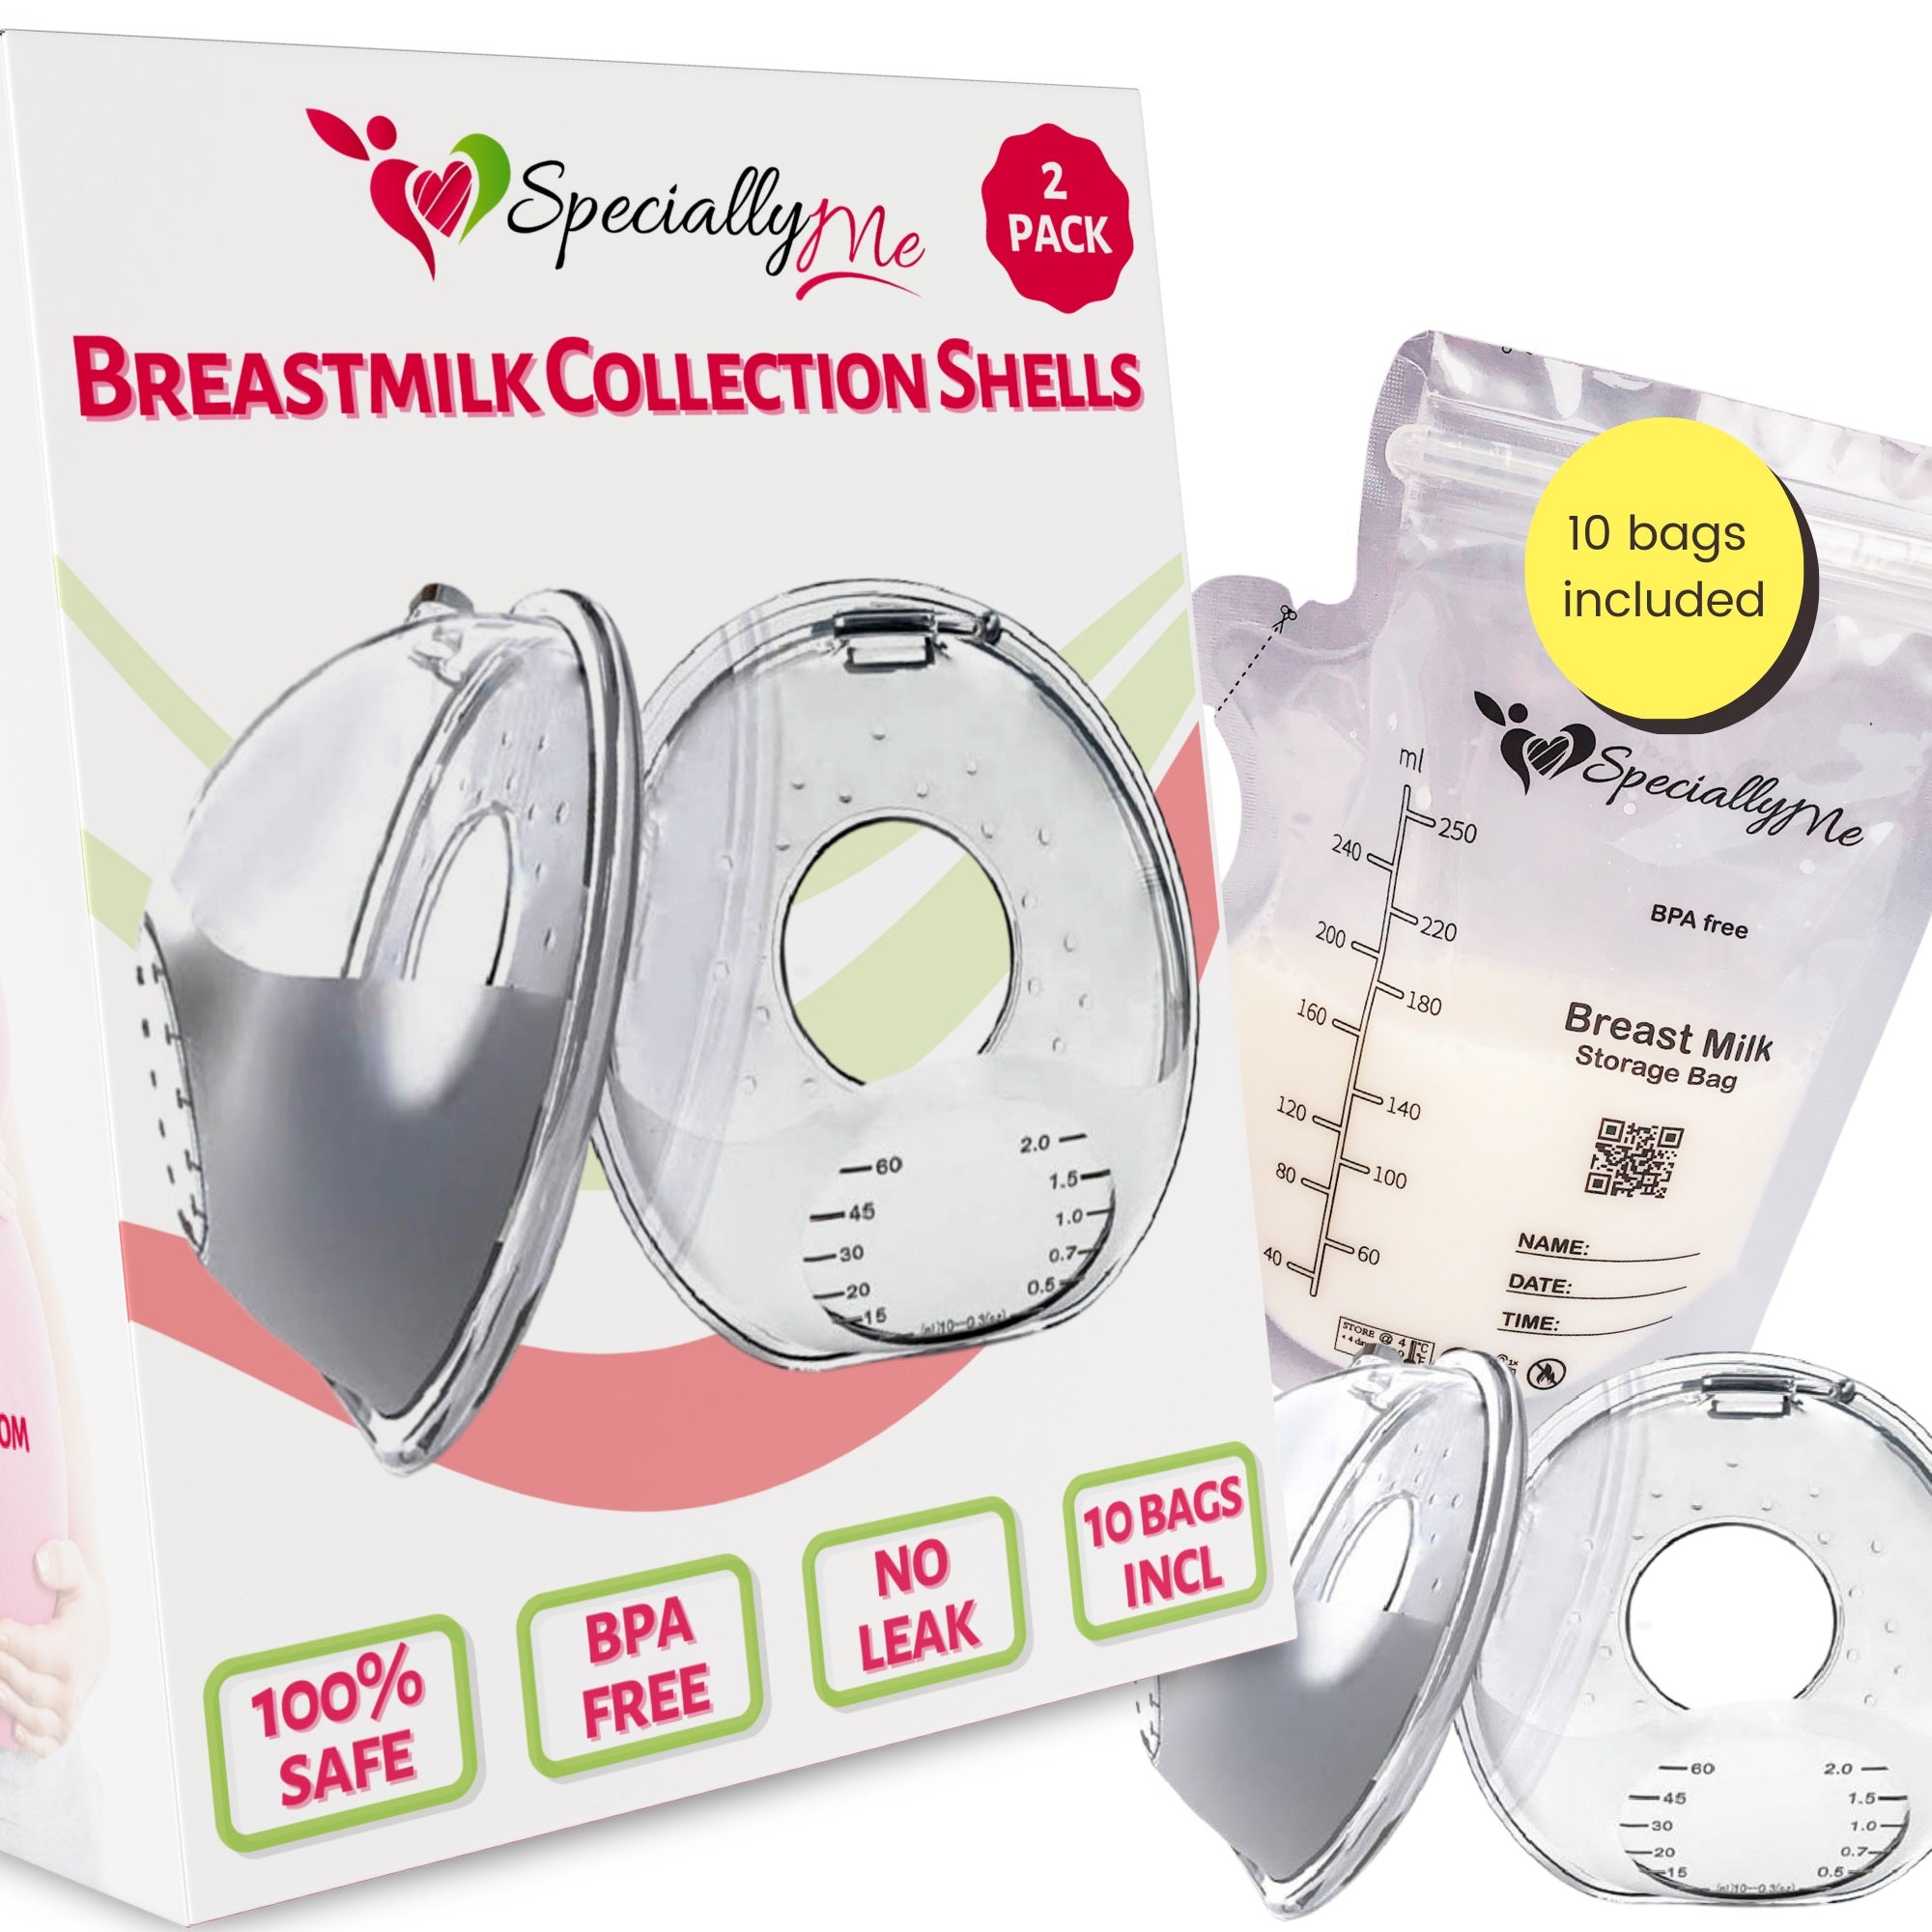 Breast Milk Collection Shells